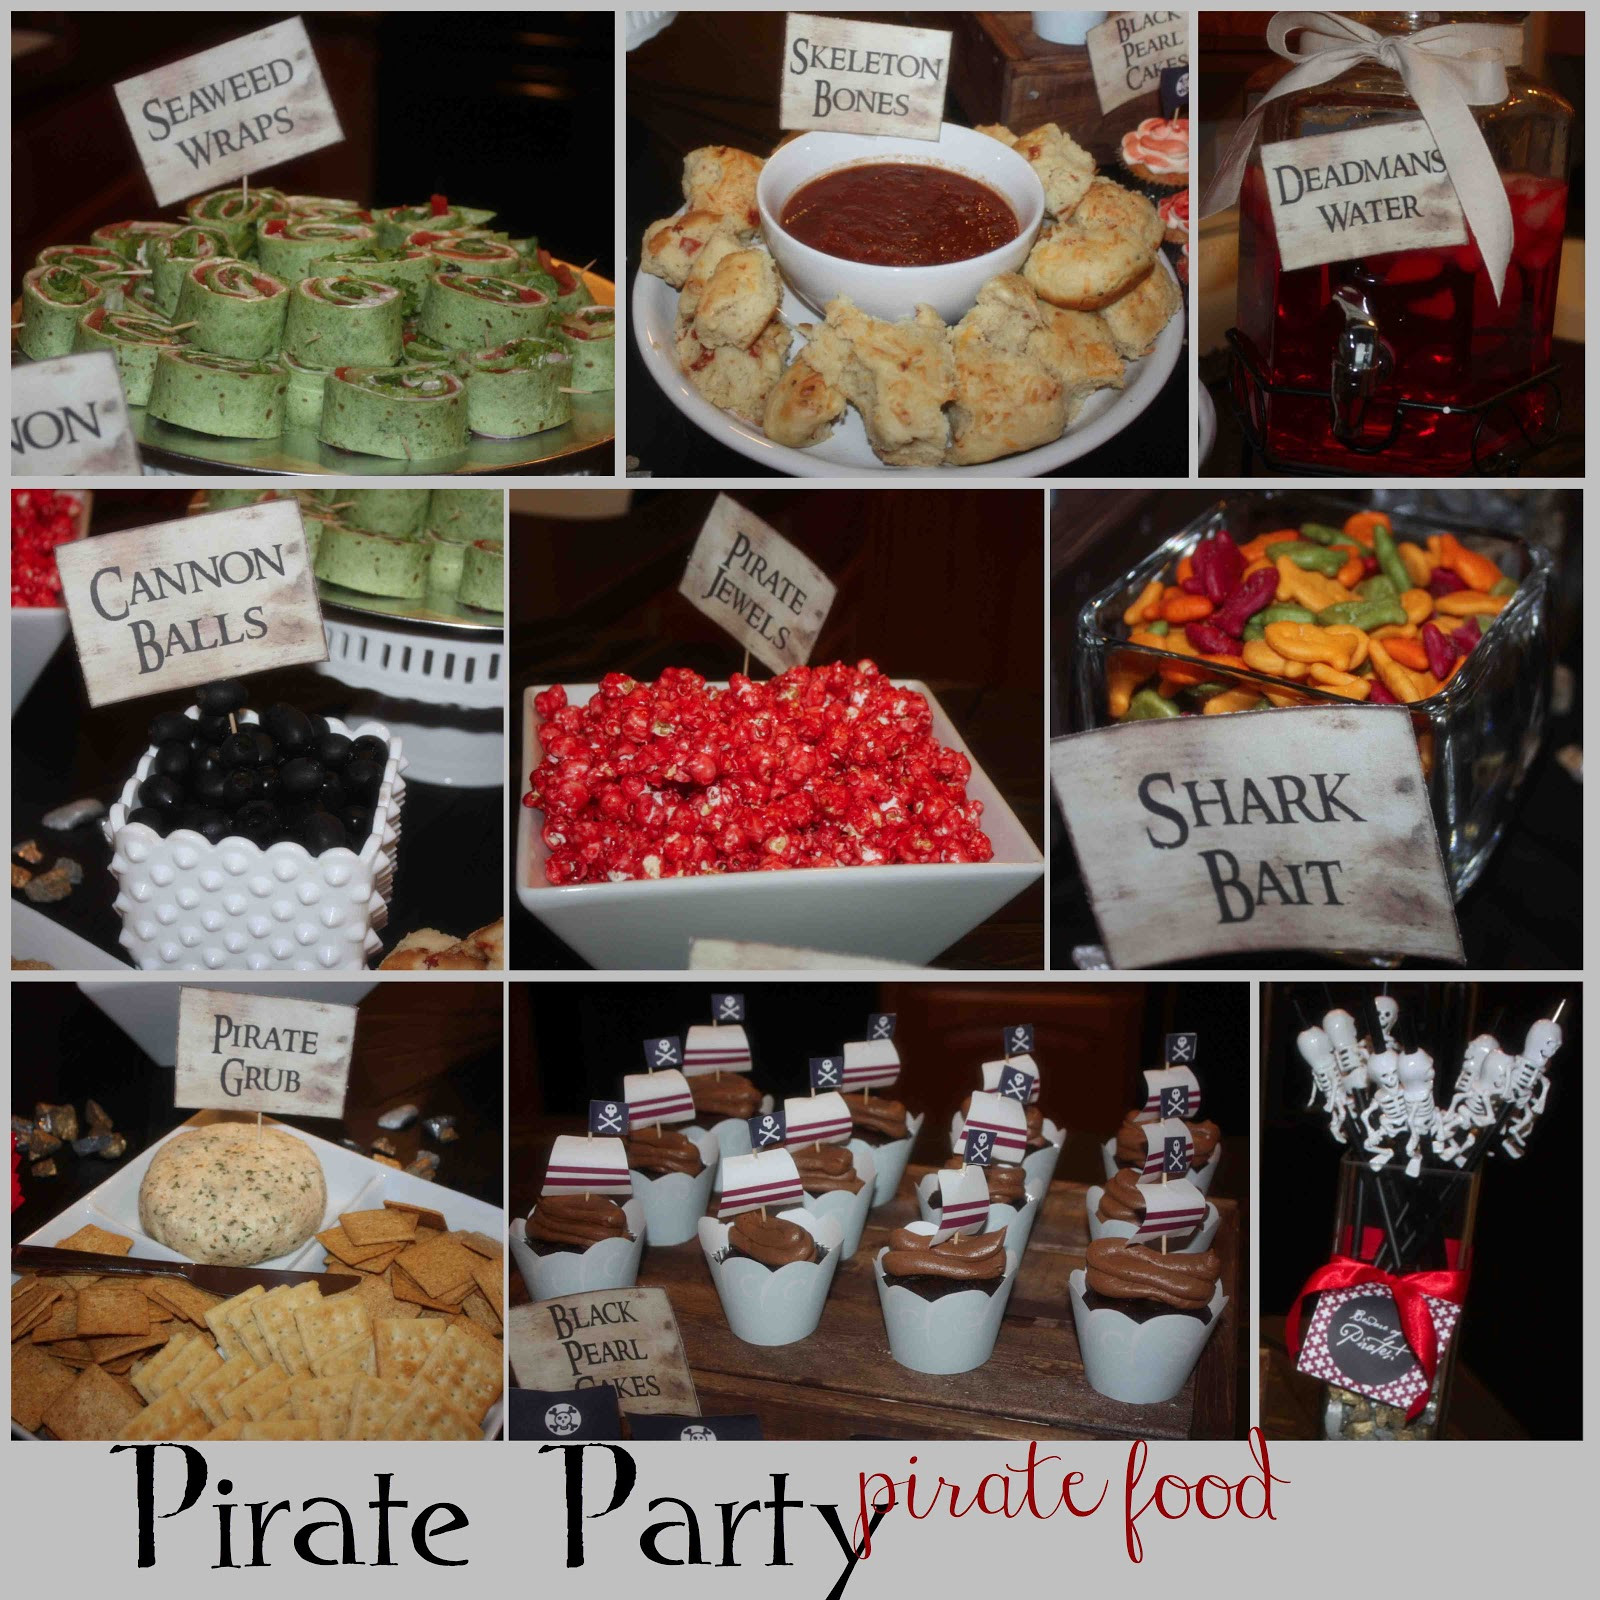 Pirate Party Food Ideas
 just Sweet and Simple Kids Pirate Party